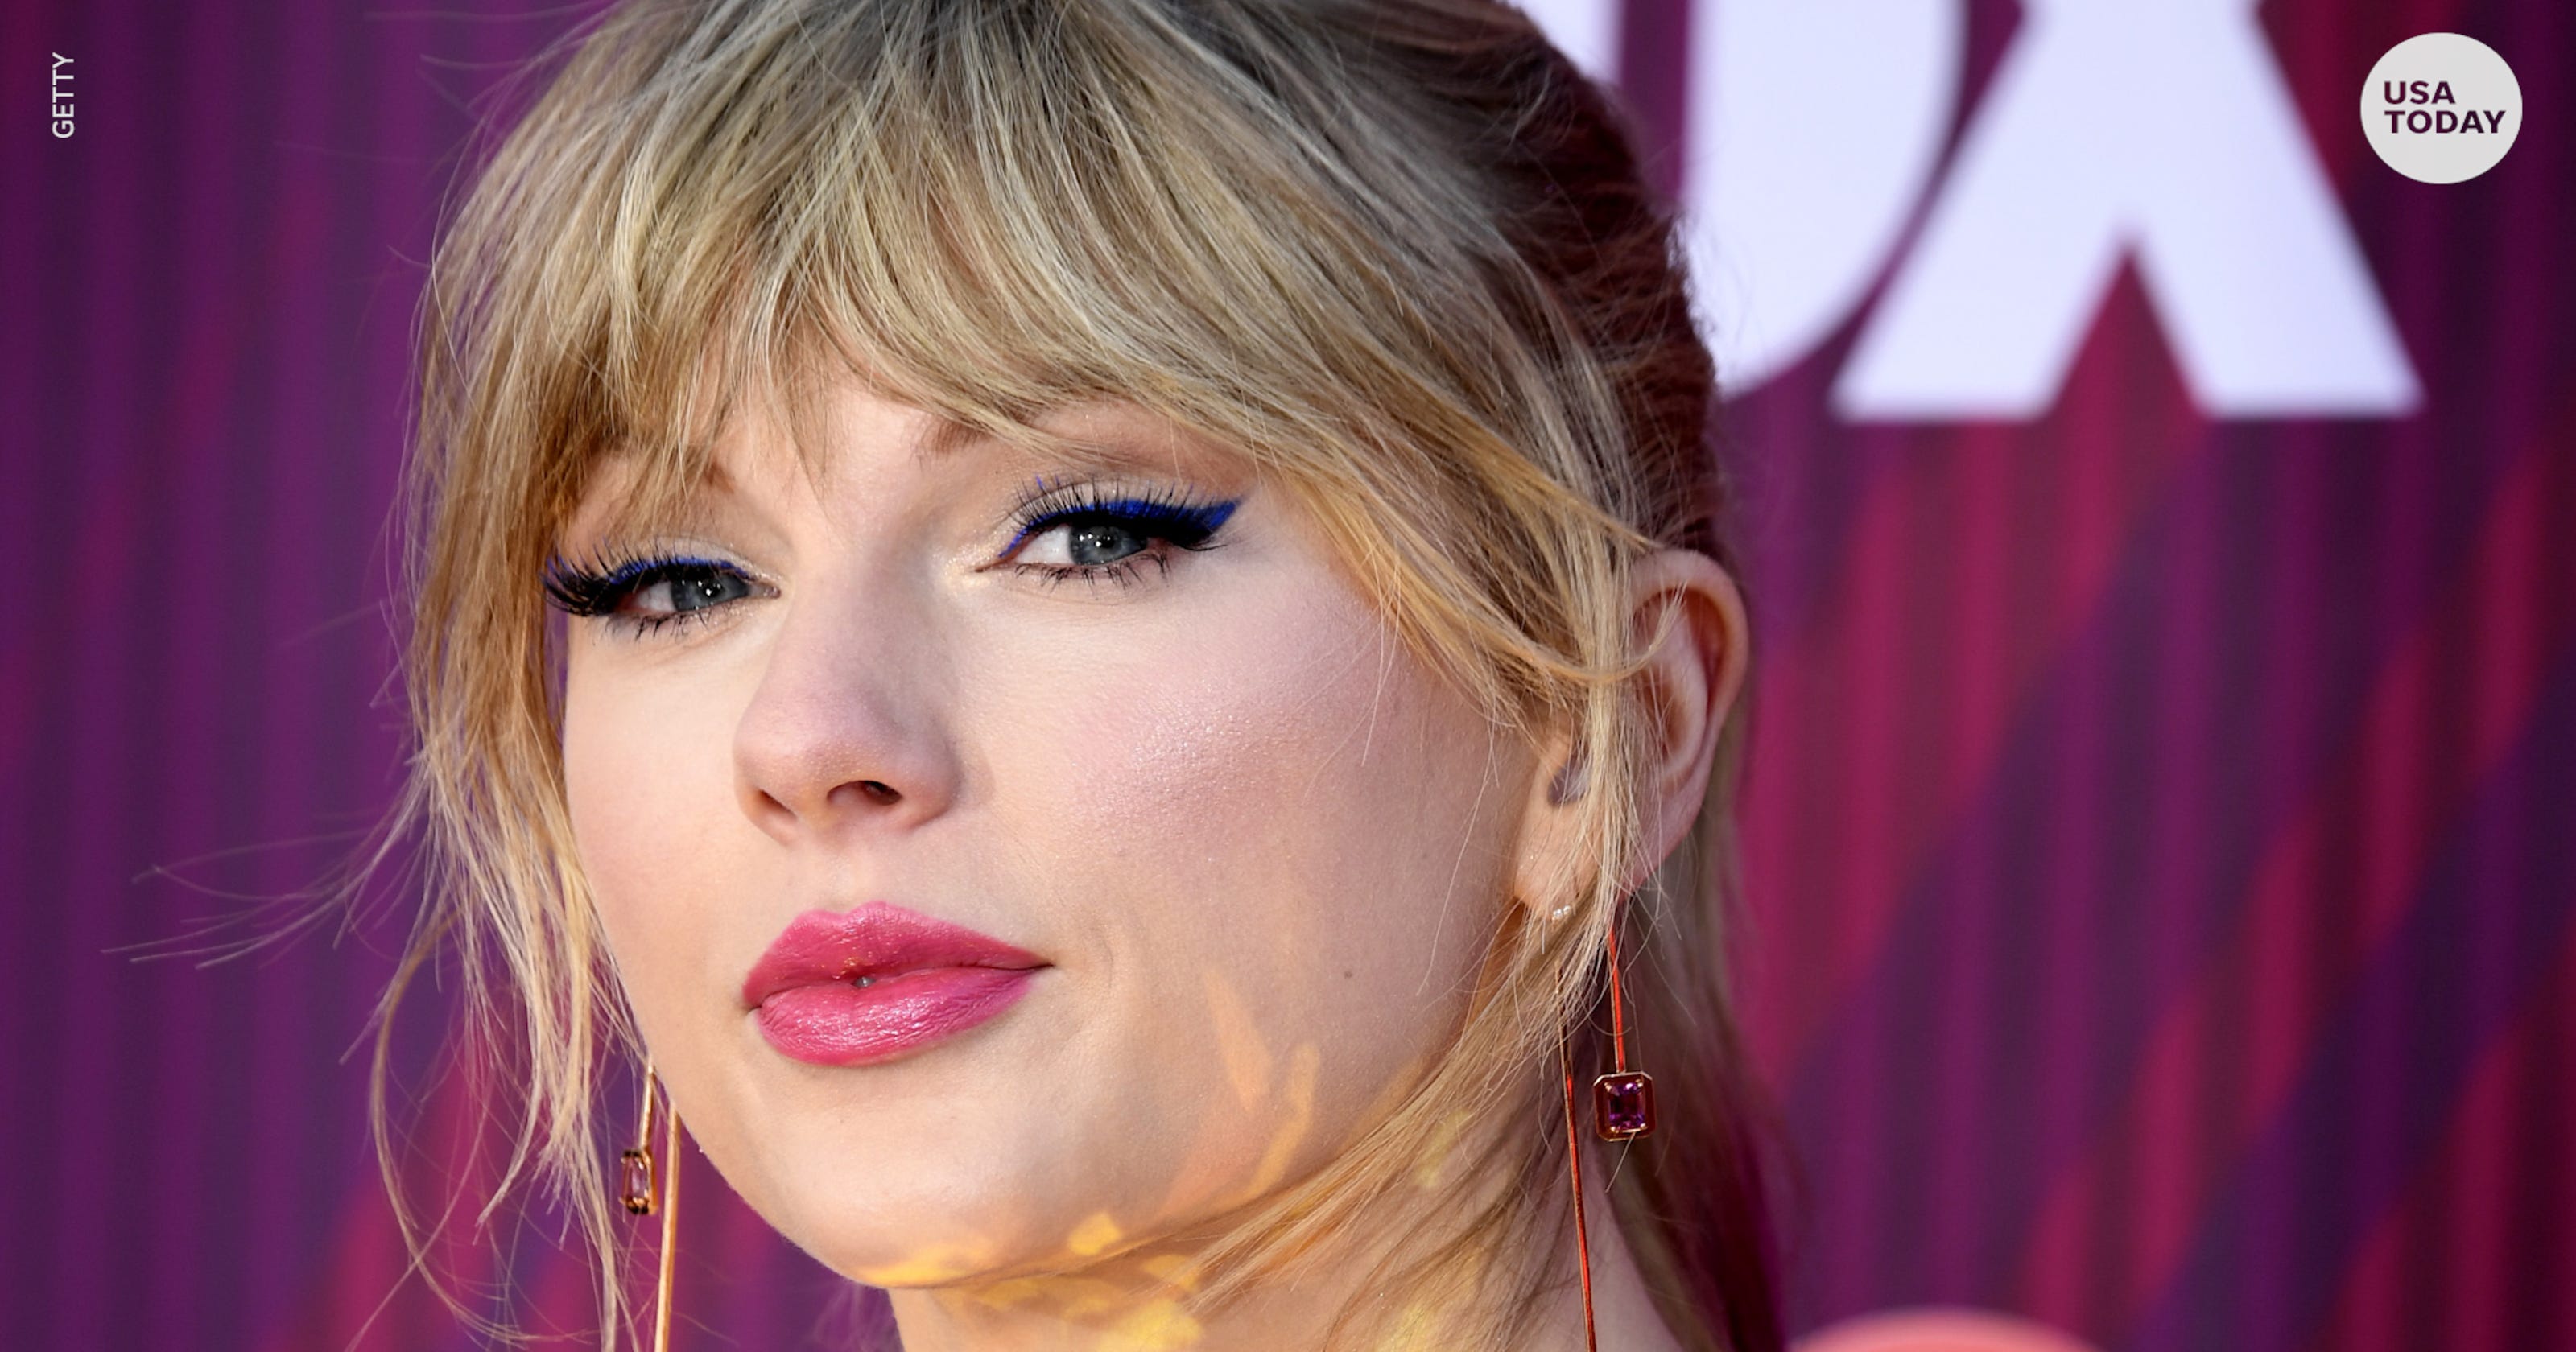 Taylor Swifts Lover All The Juicy Lyrics About Her Past Dramas